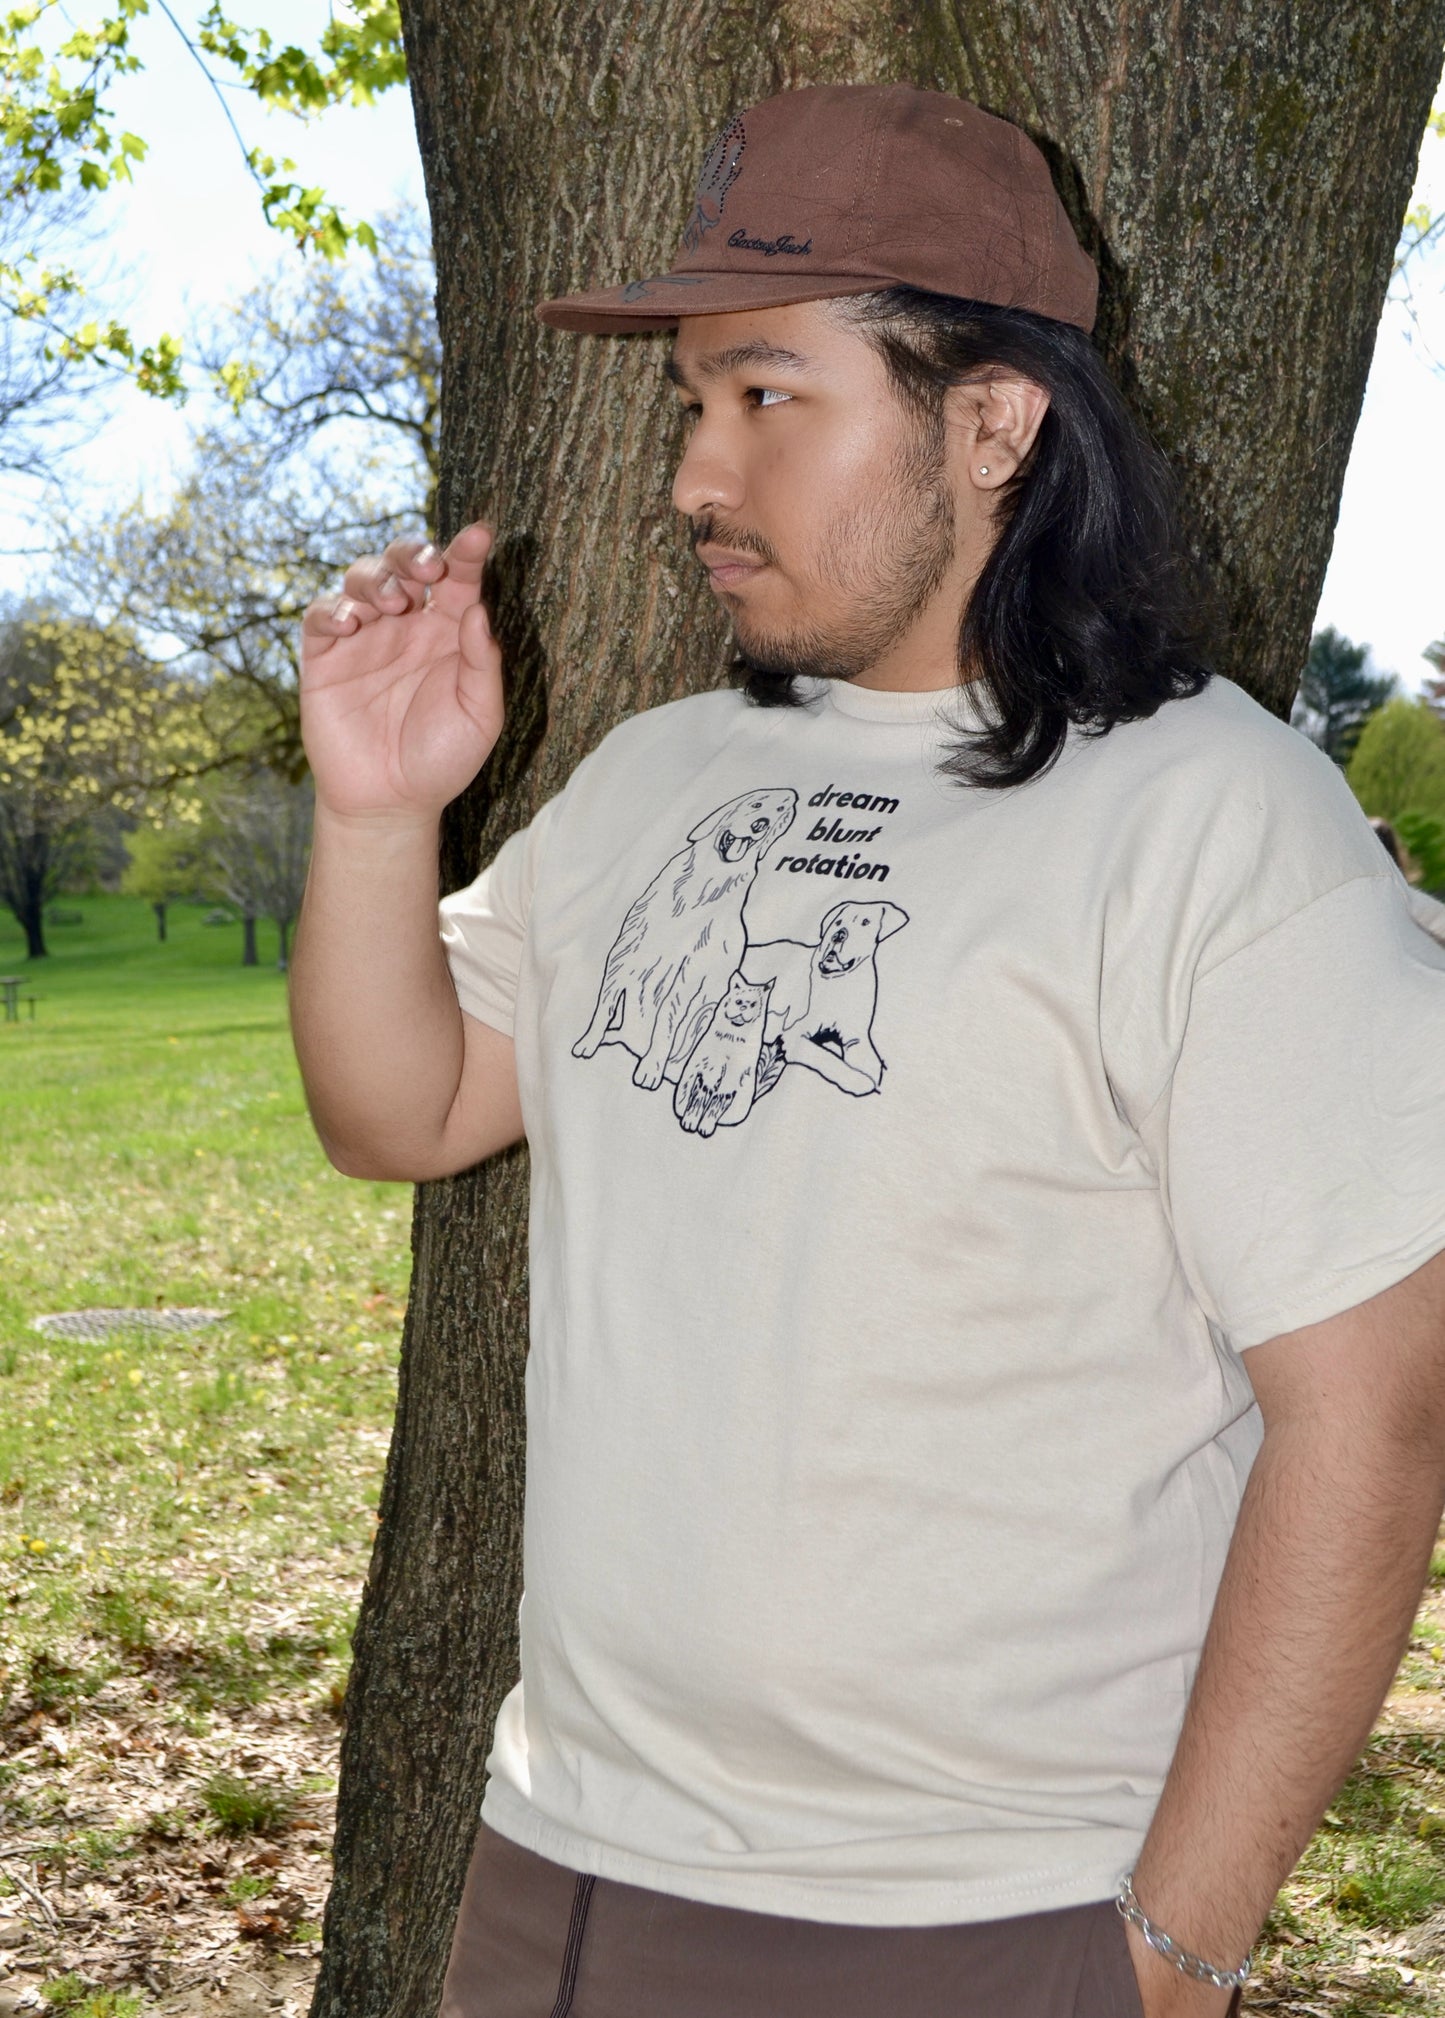 a man standing next to a tree wearing a hat